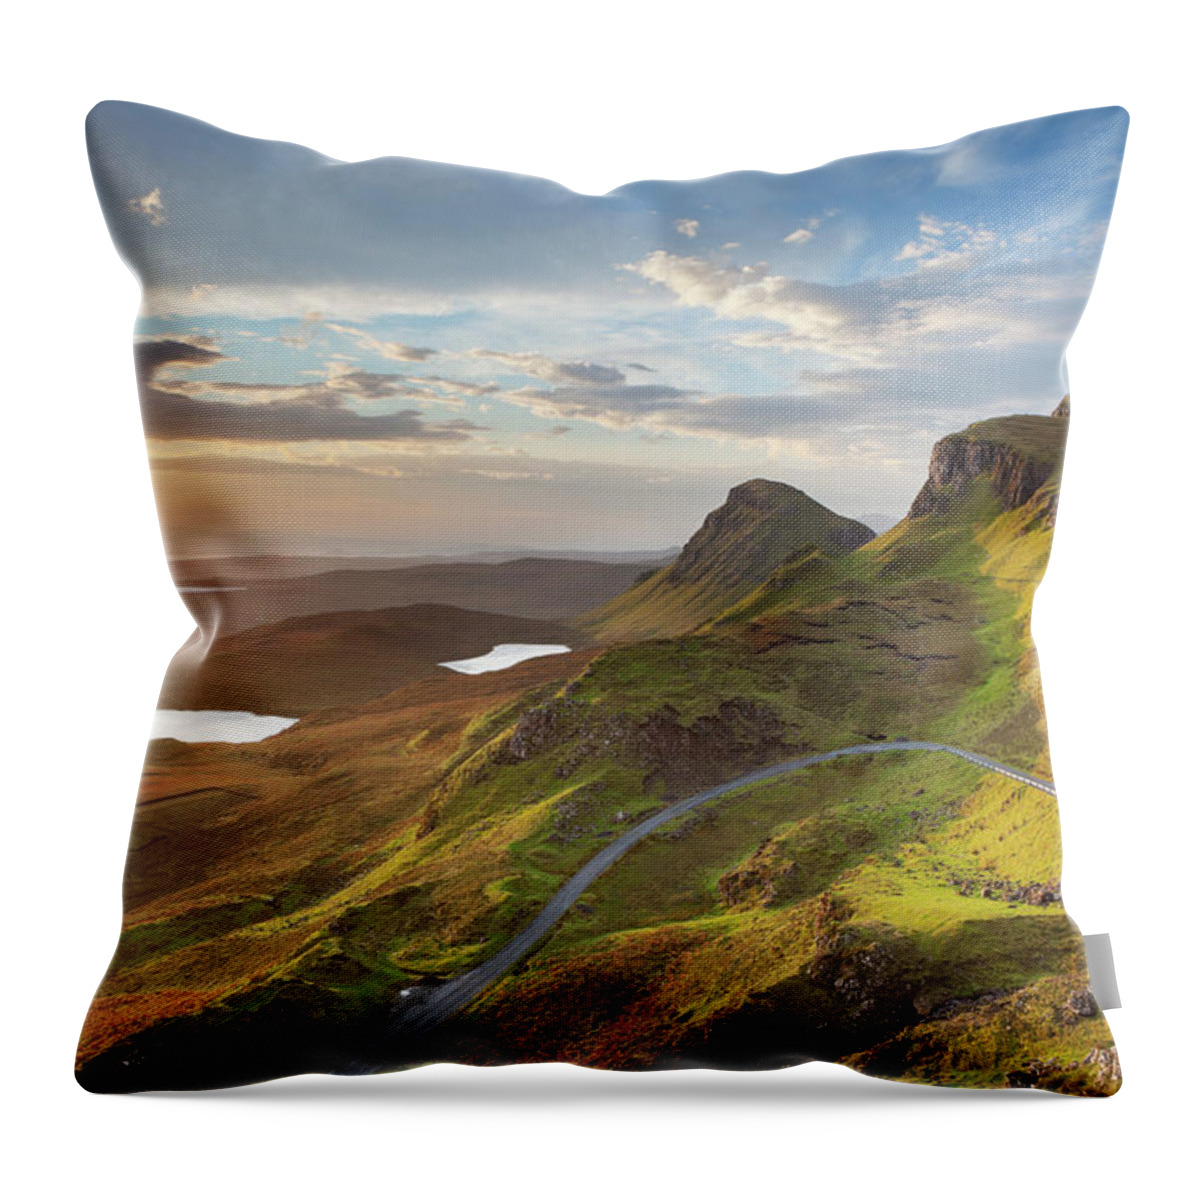 Scenics Throw Pillow featuring the photograph Sunrise At Quiraing, Isle Of Skye #1 by Sara winter